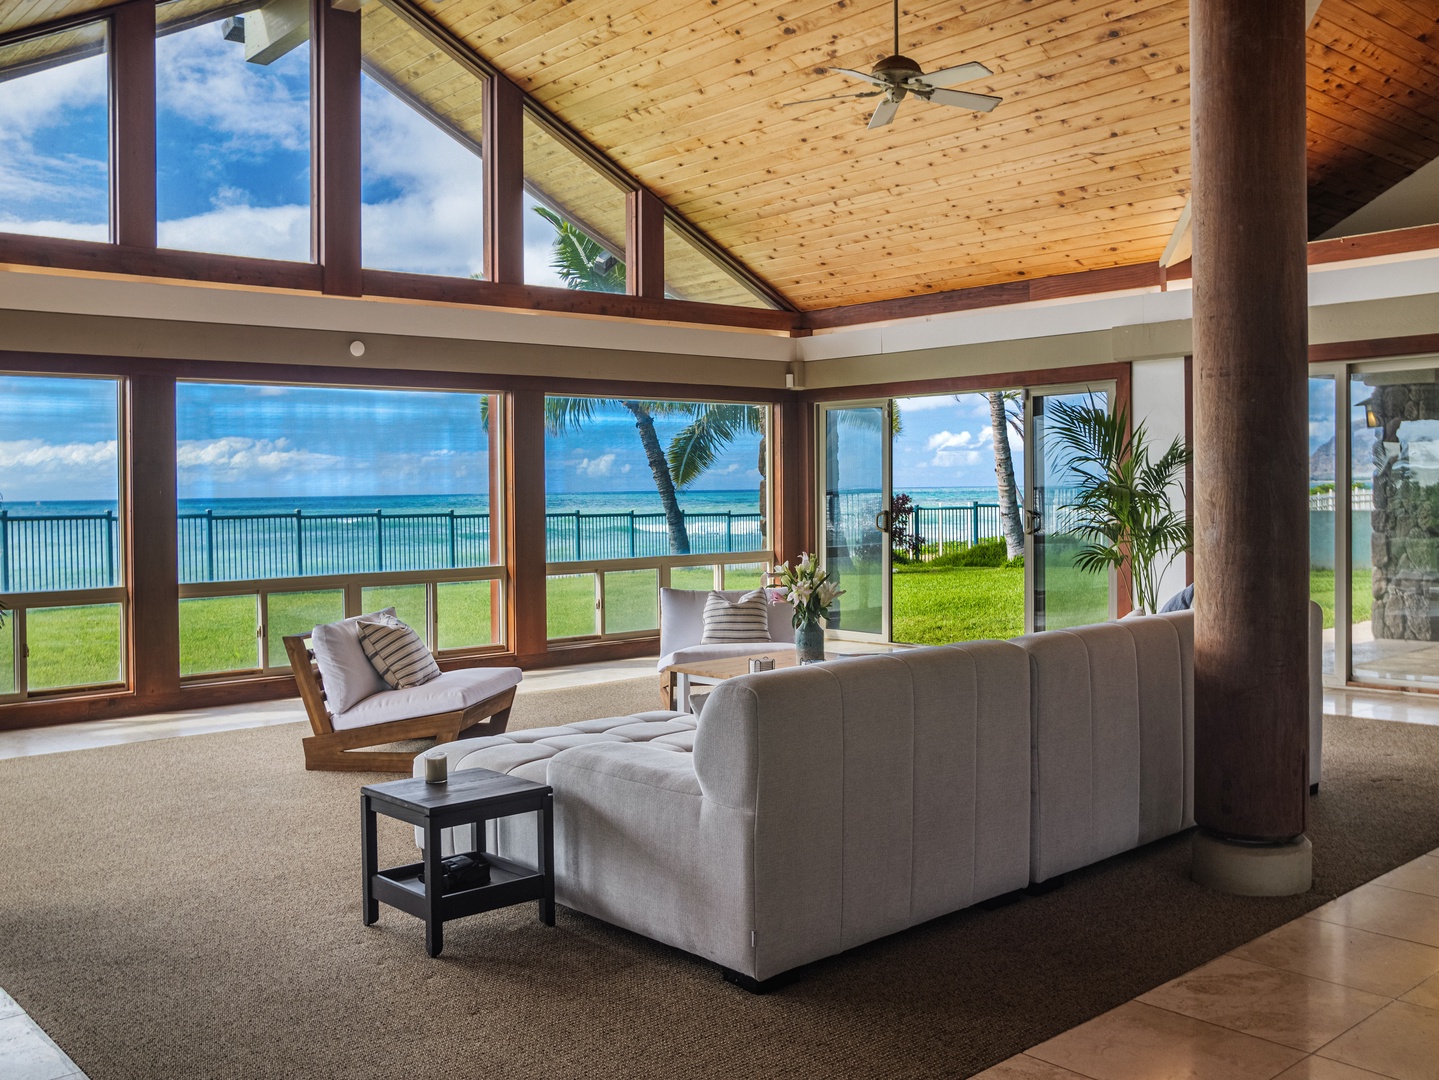 Waianae Vacation Rentals, Konishiki Beachhouse - Elegant living room with plush seating, ocean views, and a warm, inviting atmosphere.